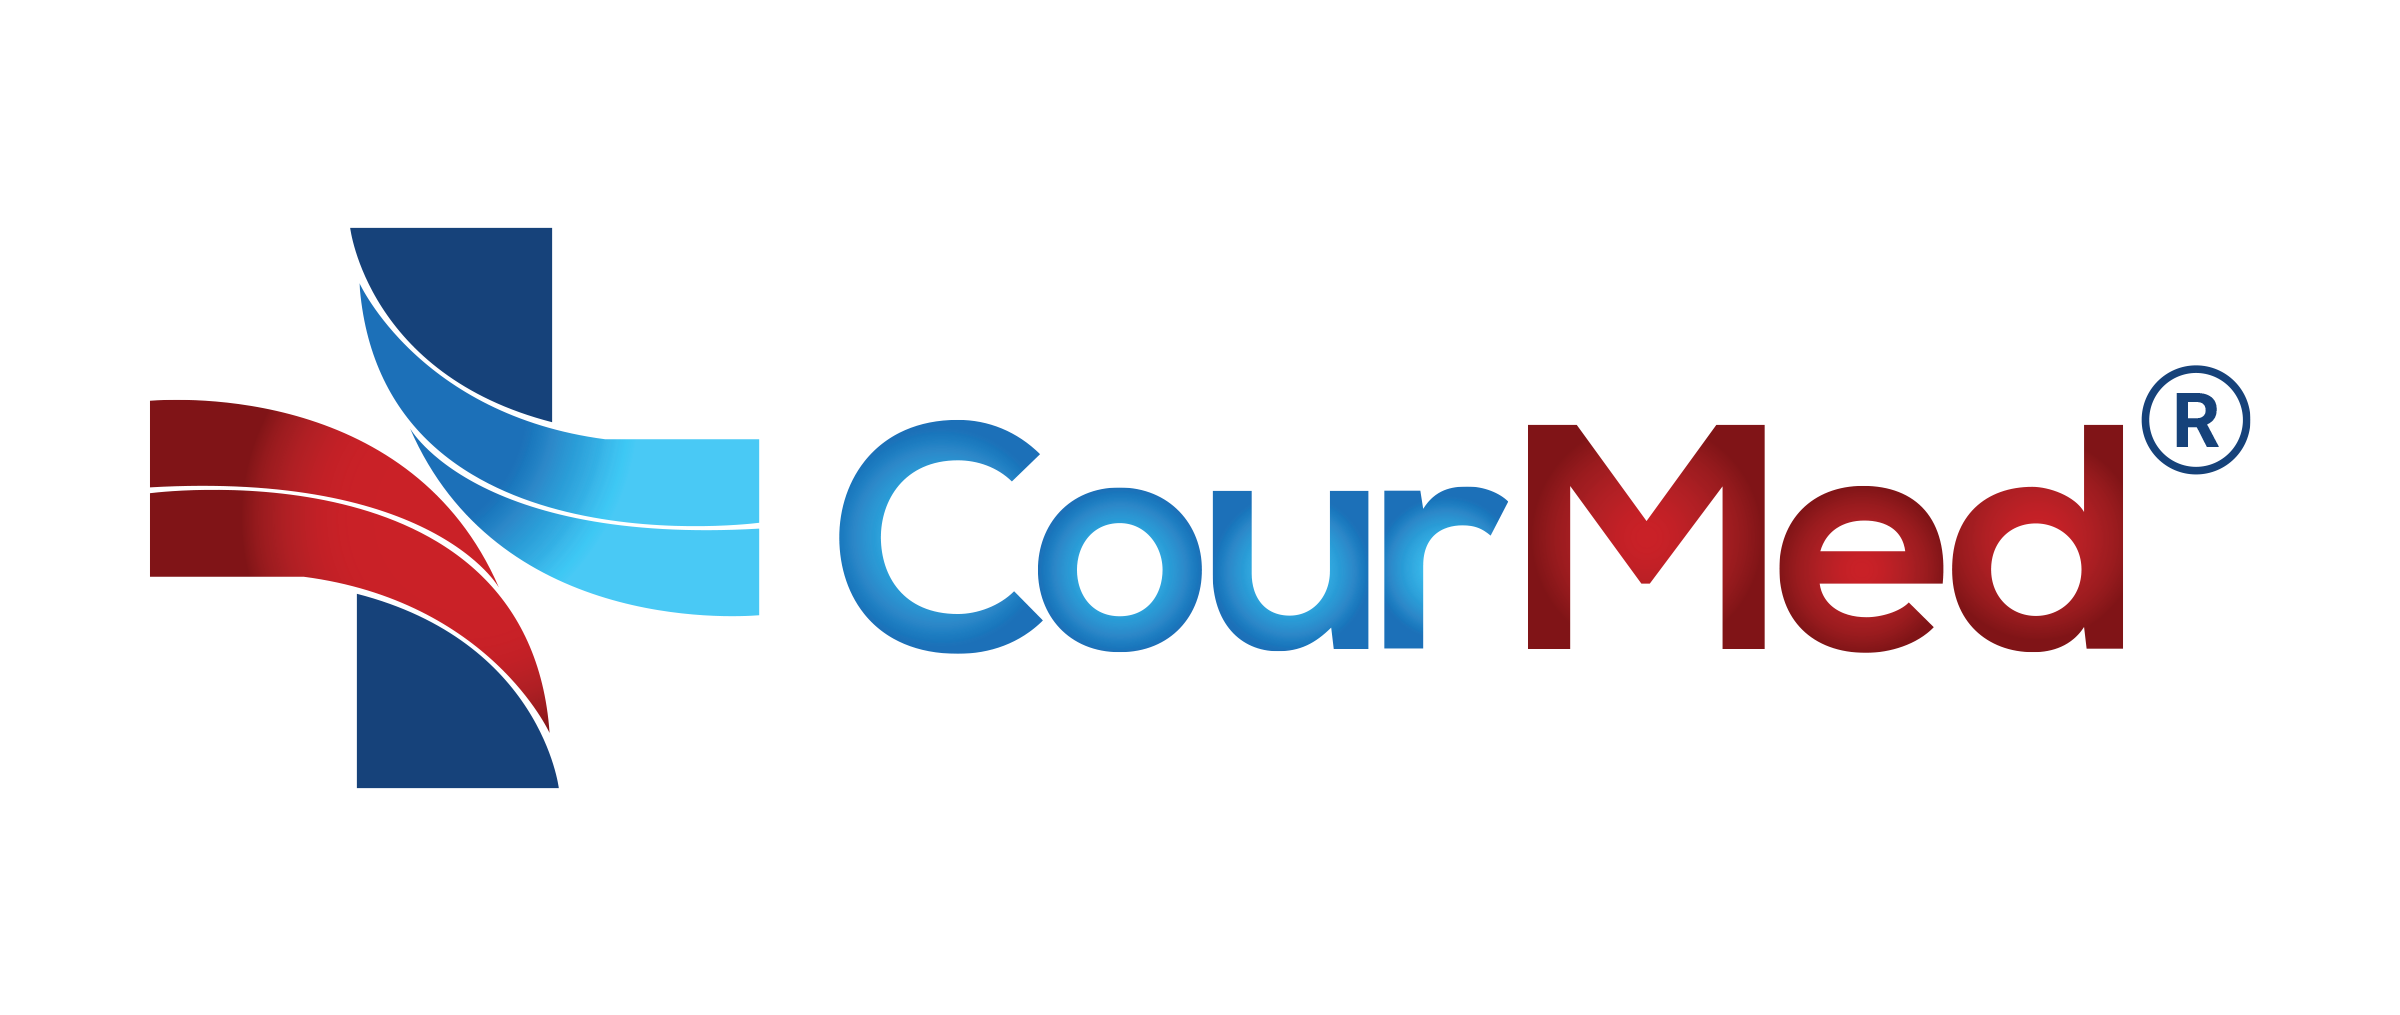 courmed_logo.png